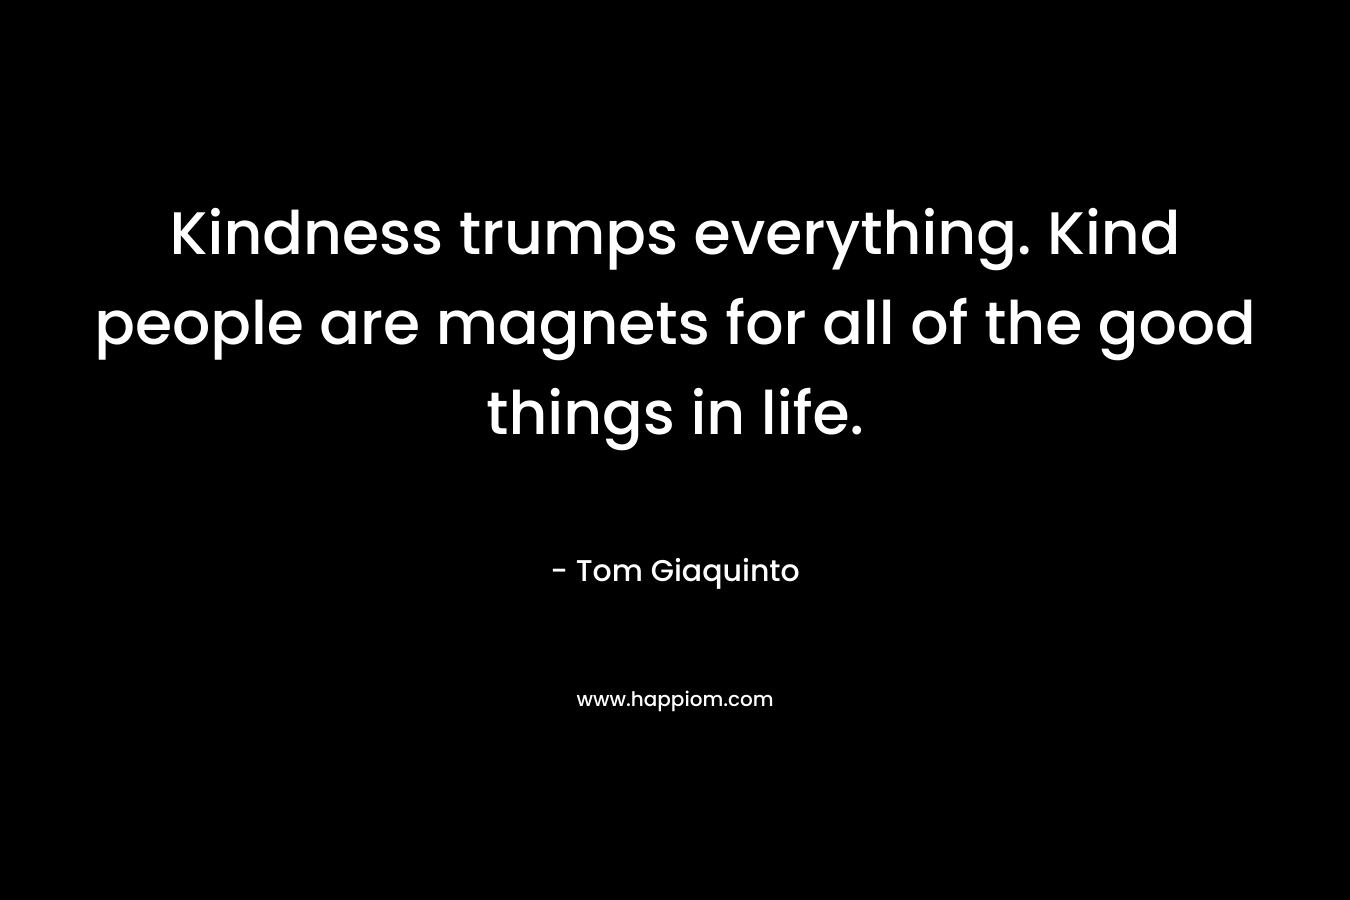 Kindness trumps everything. Kind people are magnets for all of the good things in life. – Tom Giaquinto